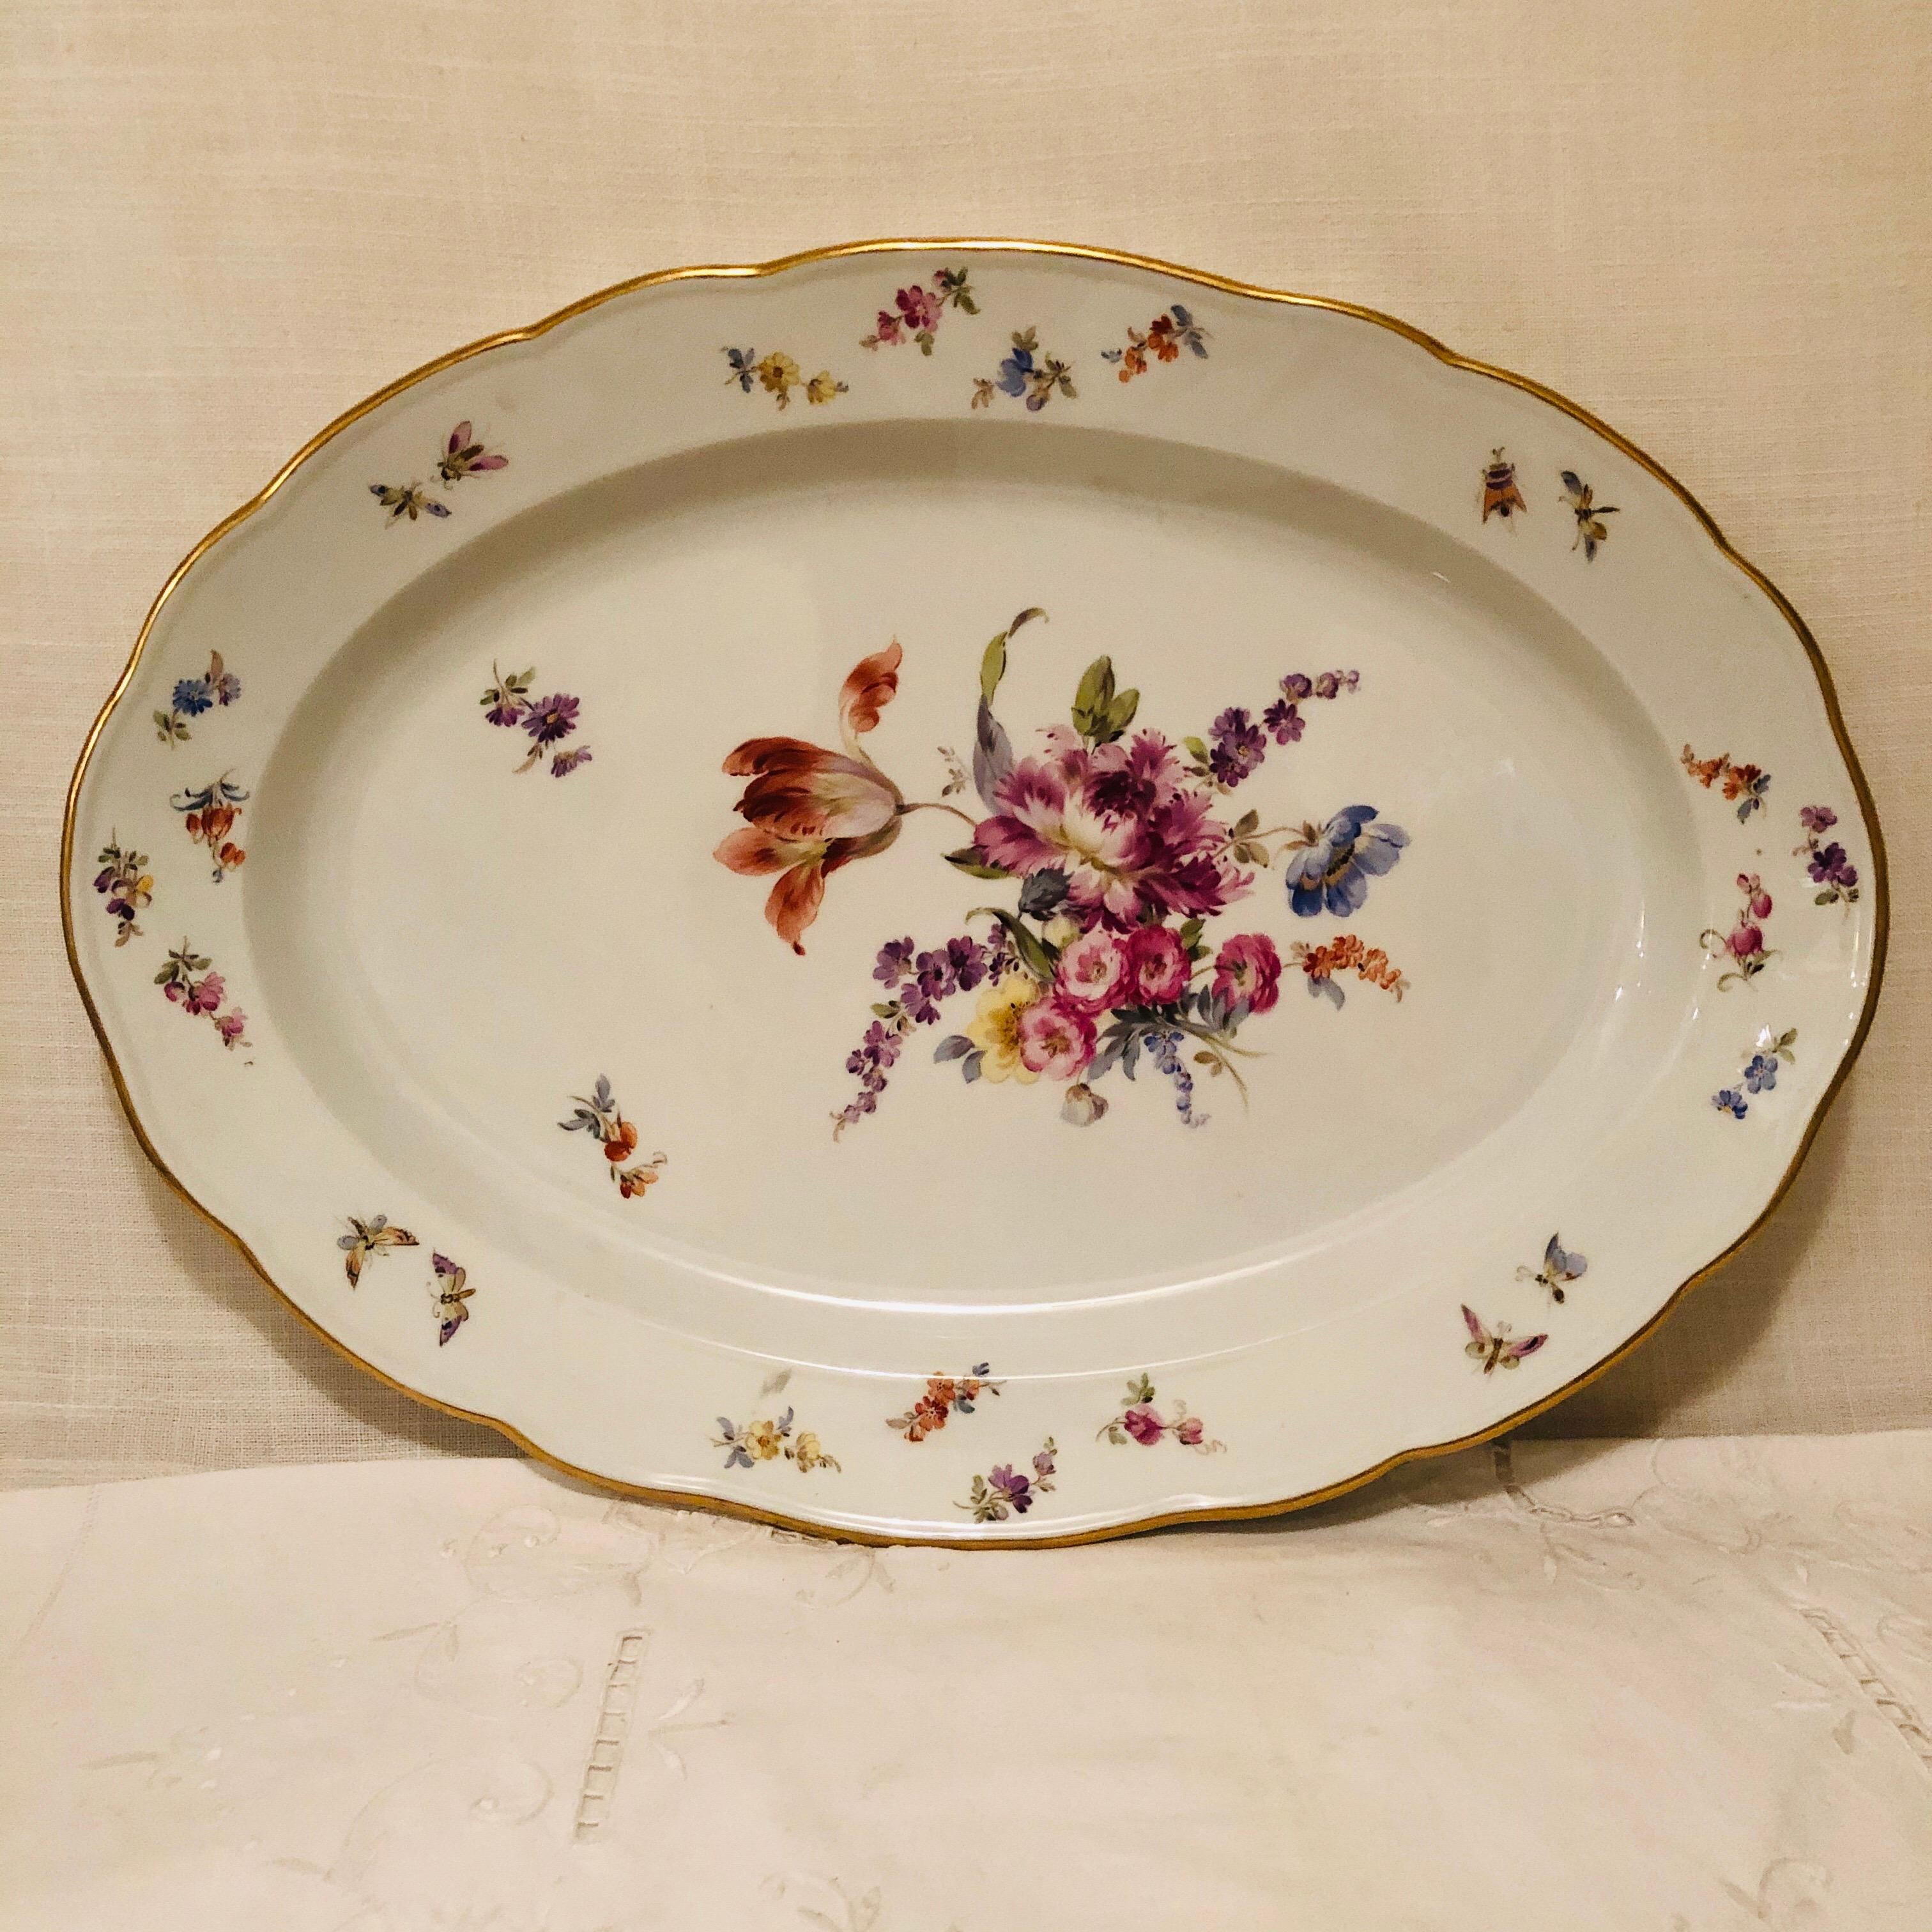 Porcelain Large Meissen Platter with Fabulous Painting of a Bouquet of Flowers and Insects